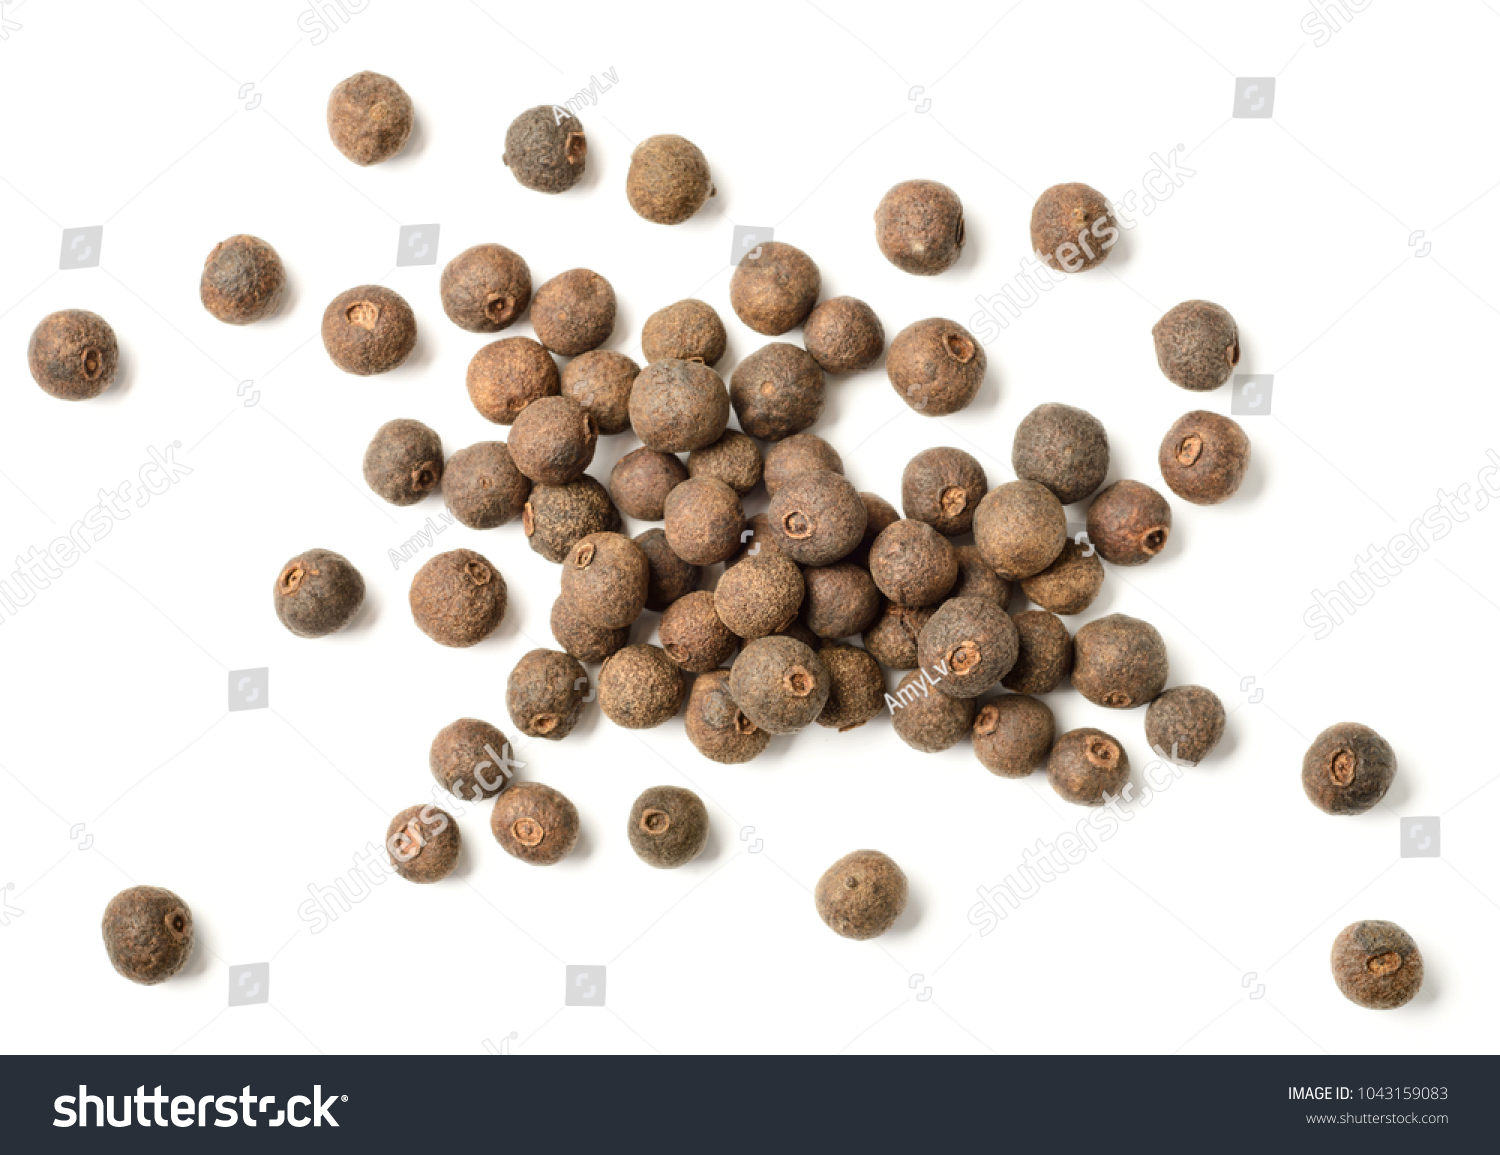 dried allspice isolated on white background, top view #1043159083